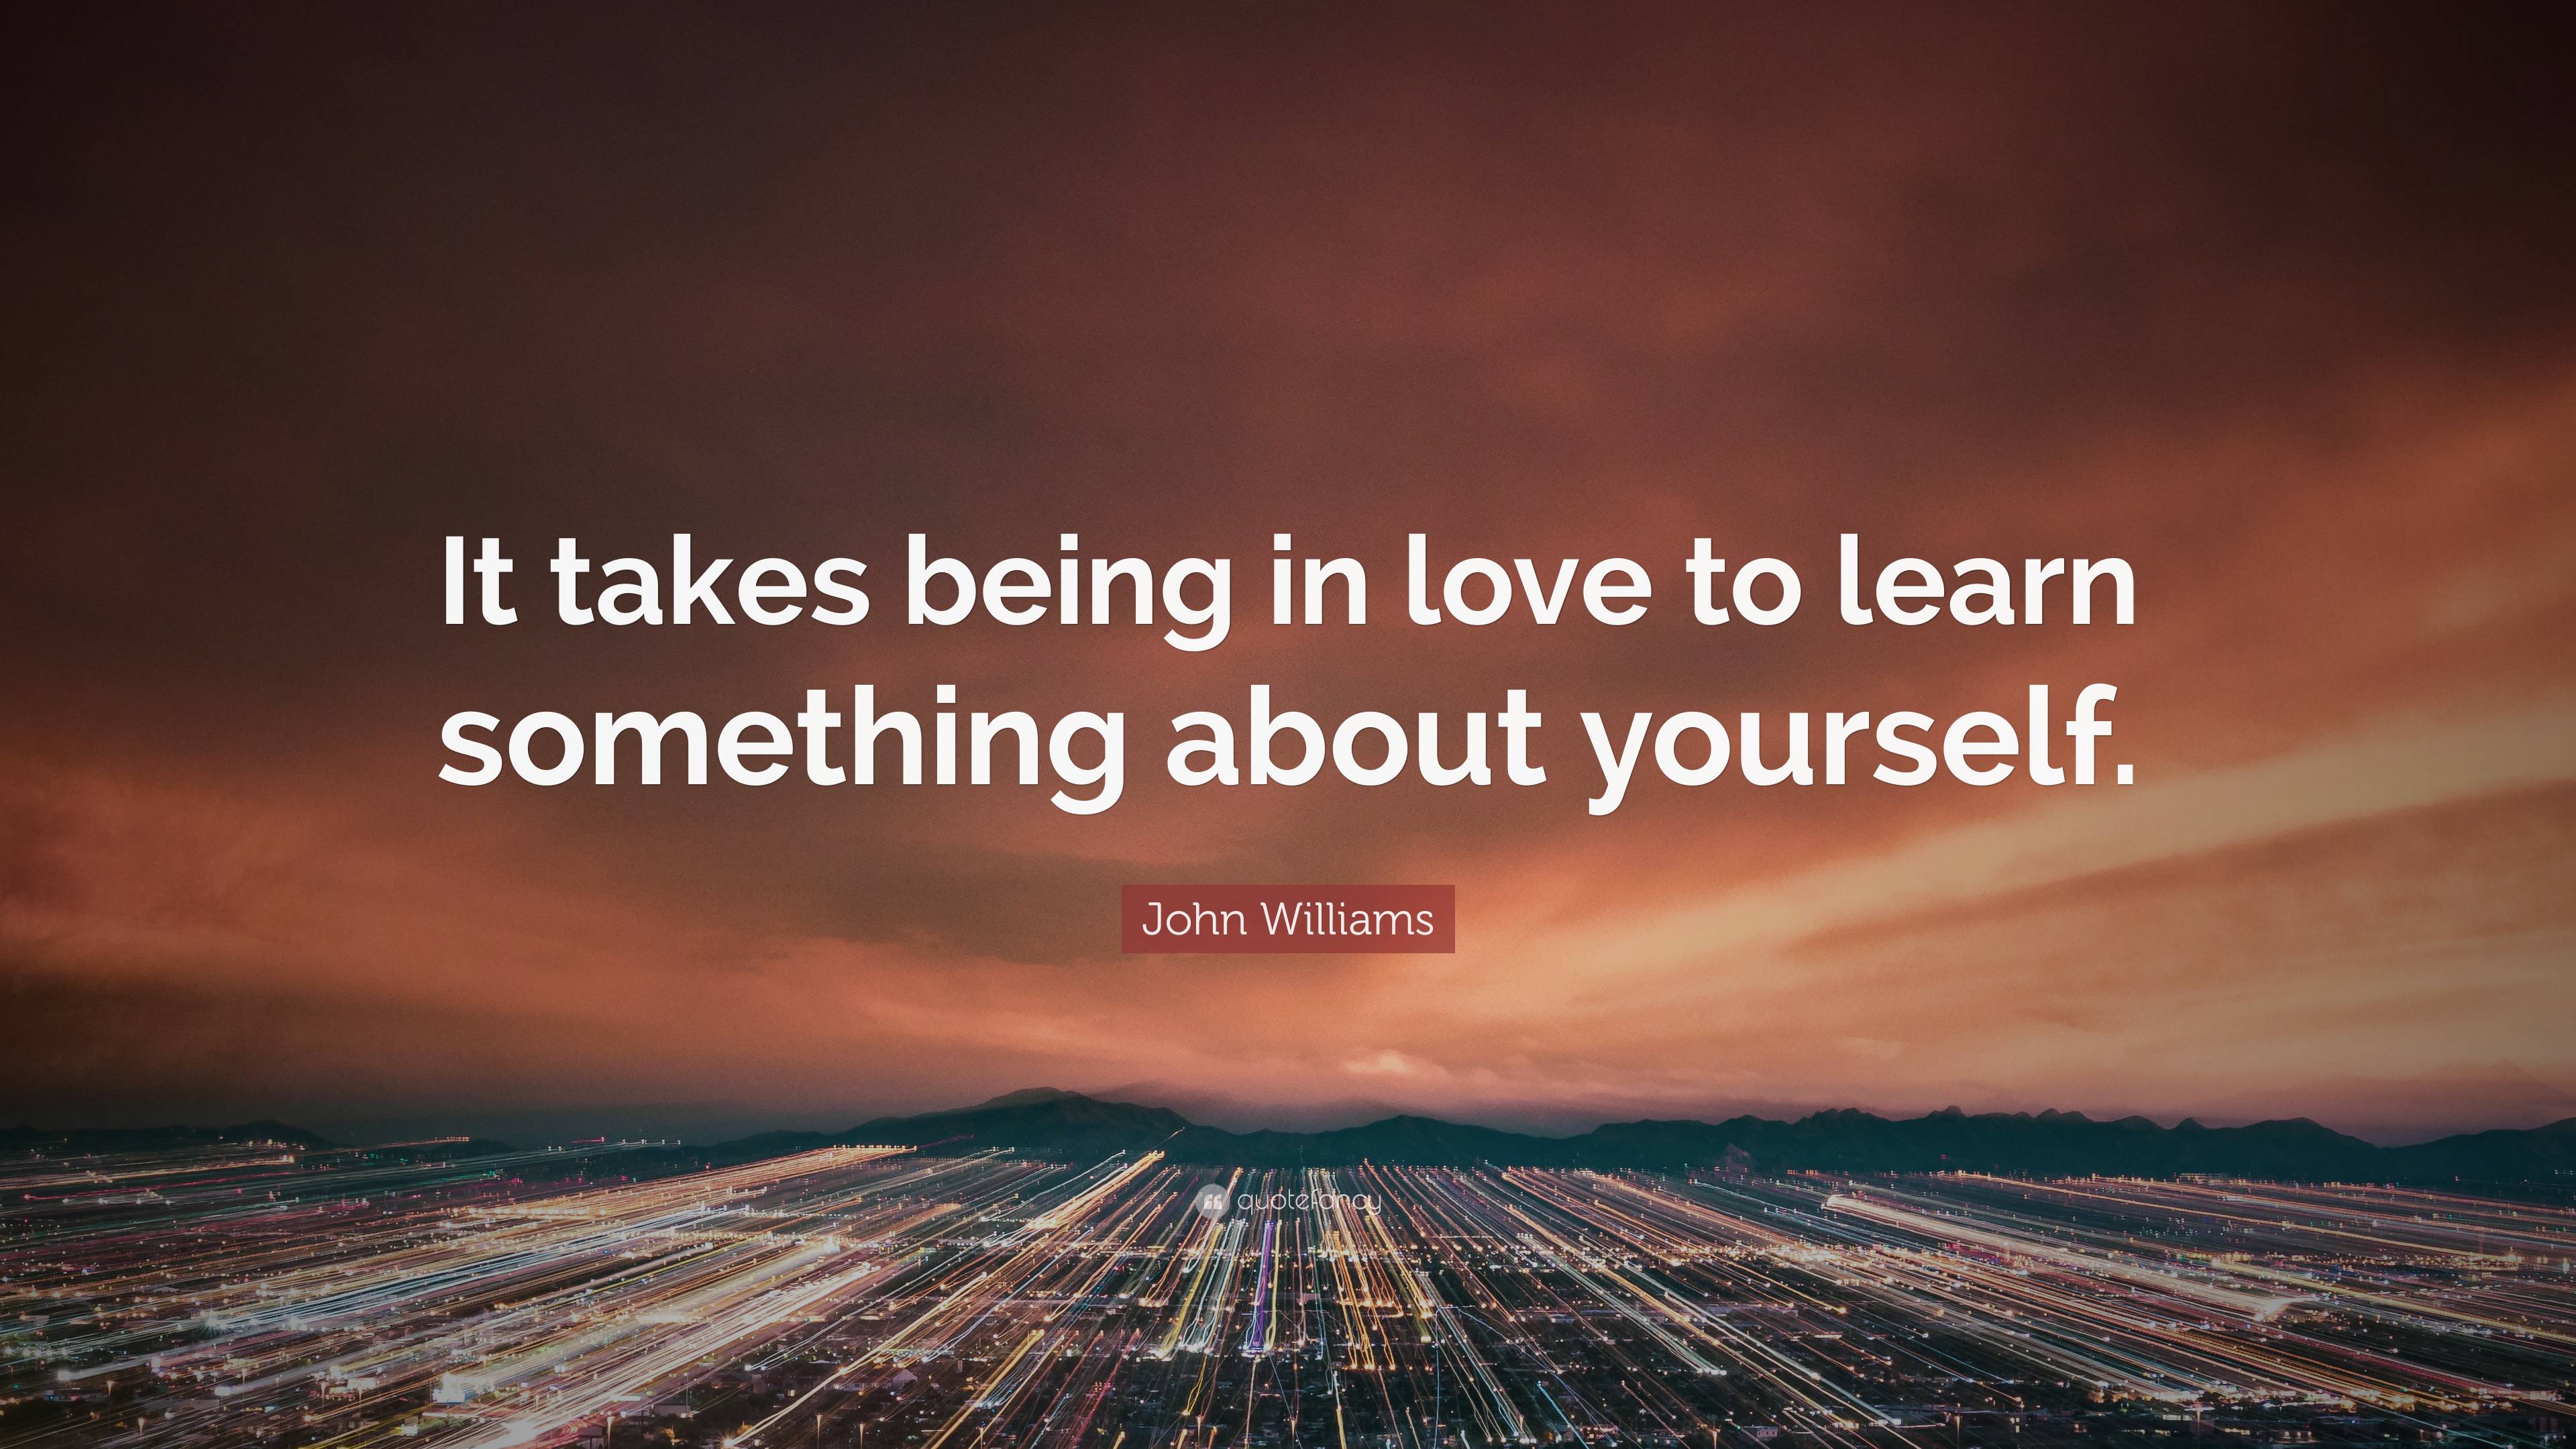 John Williams Quote: “It takes being in love to learn something about ...